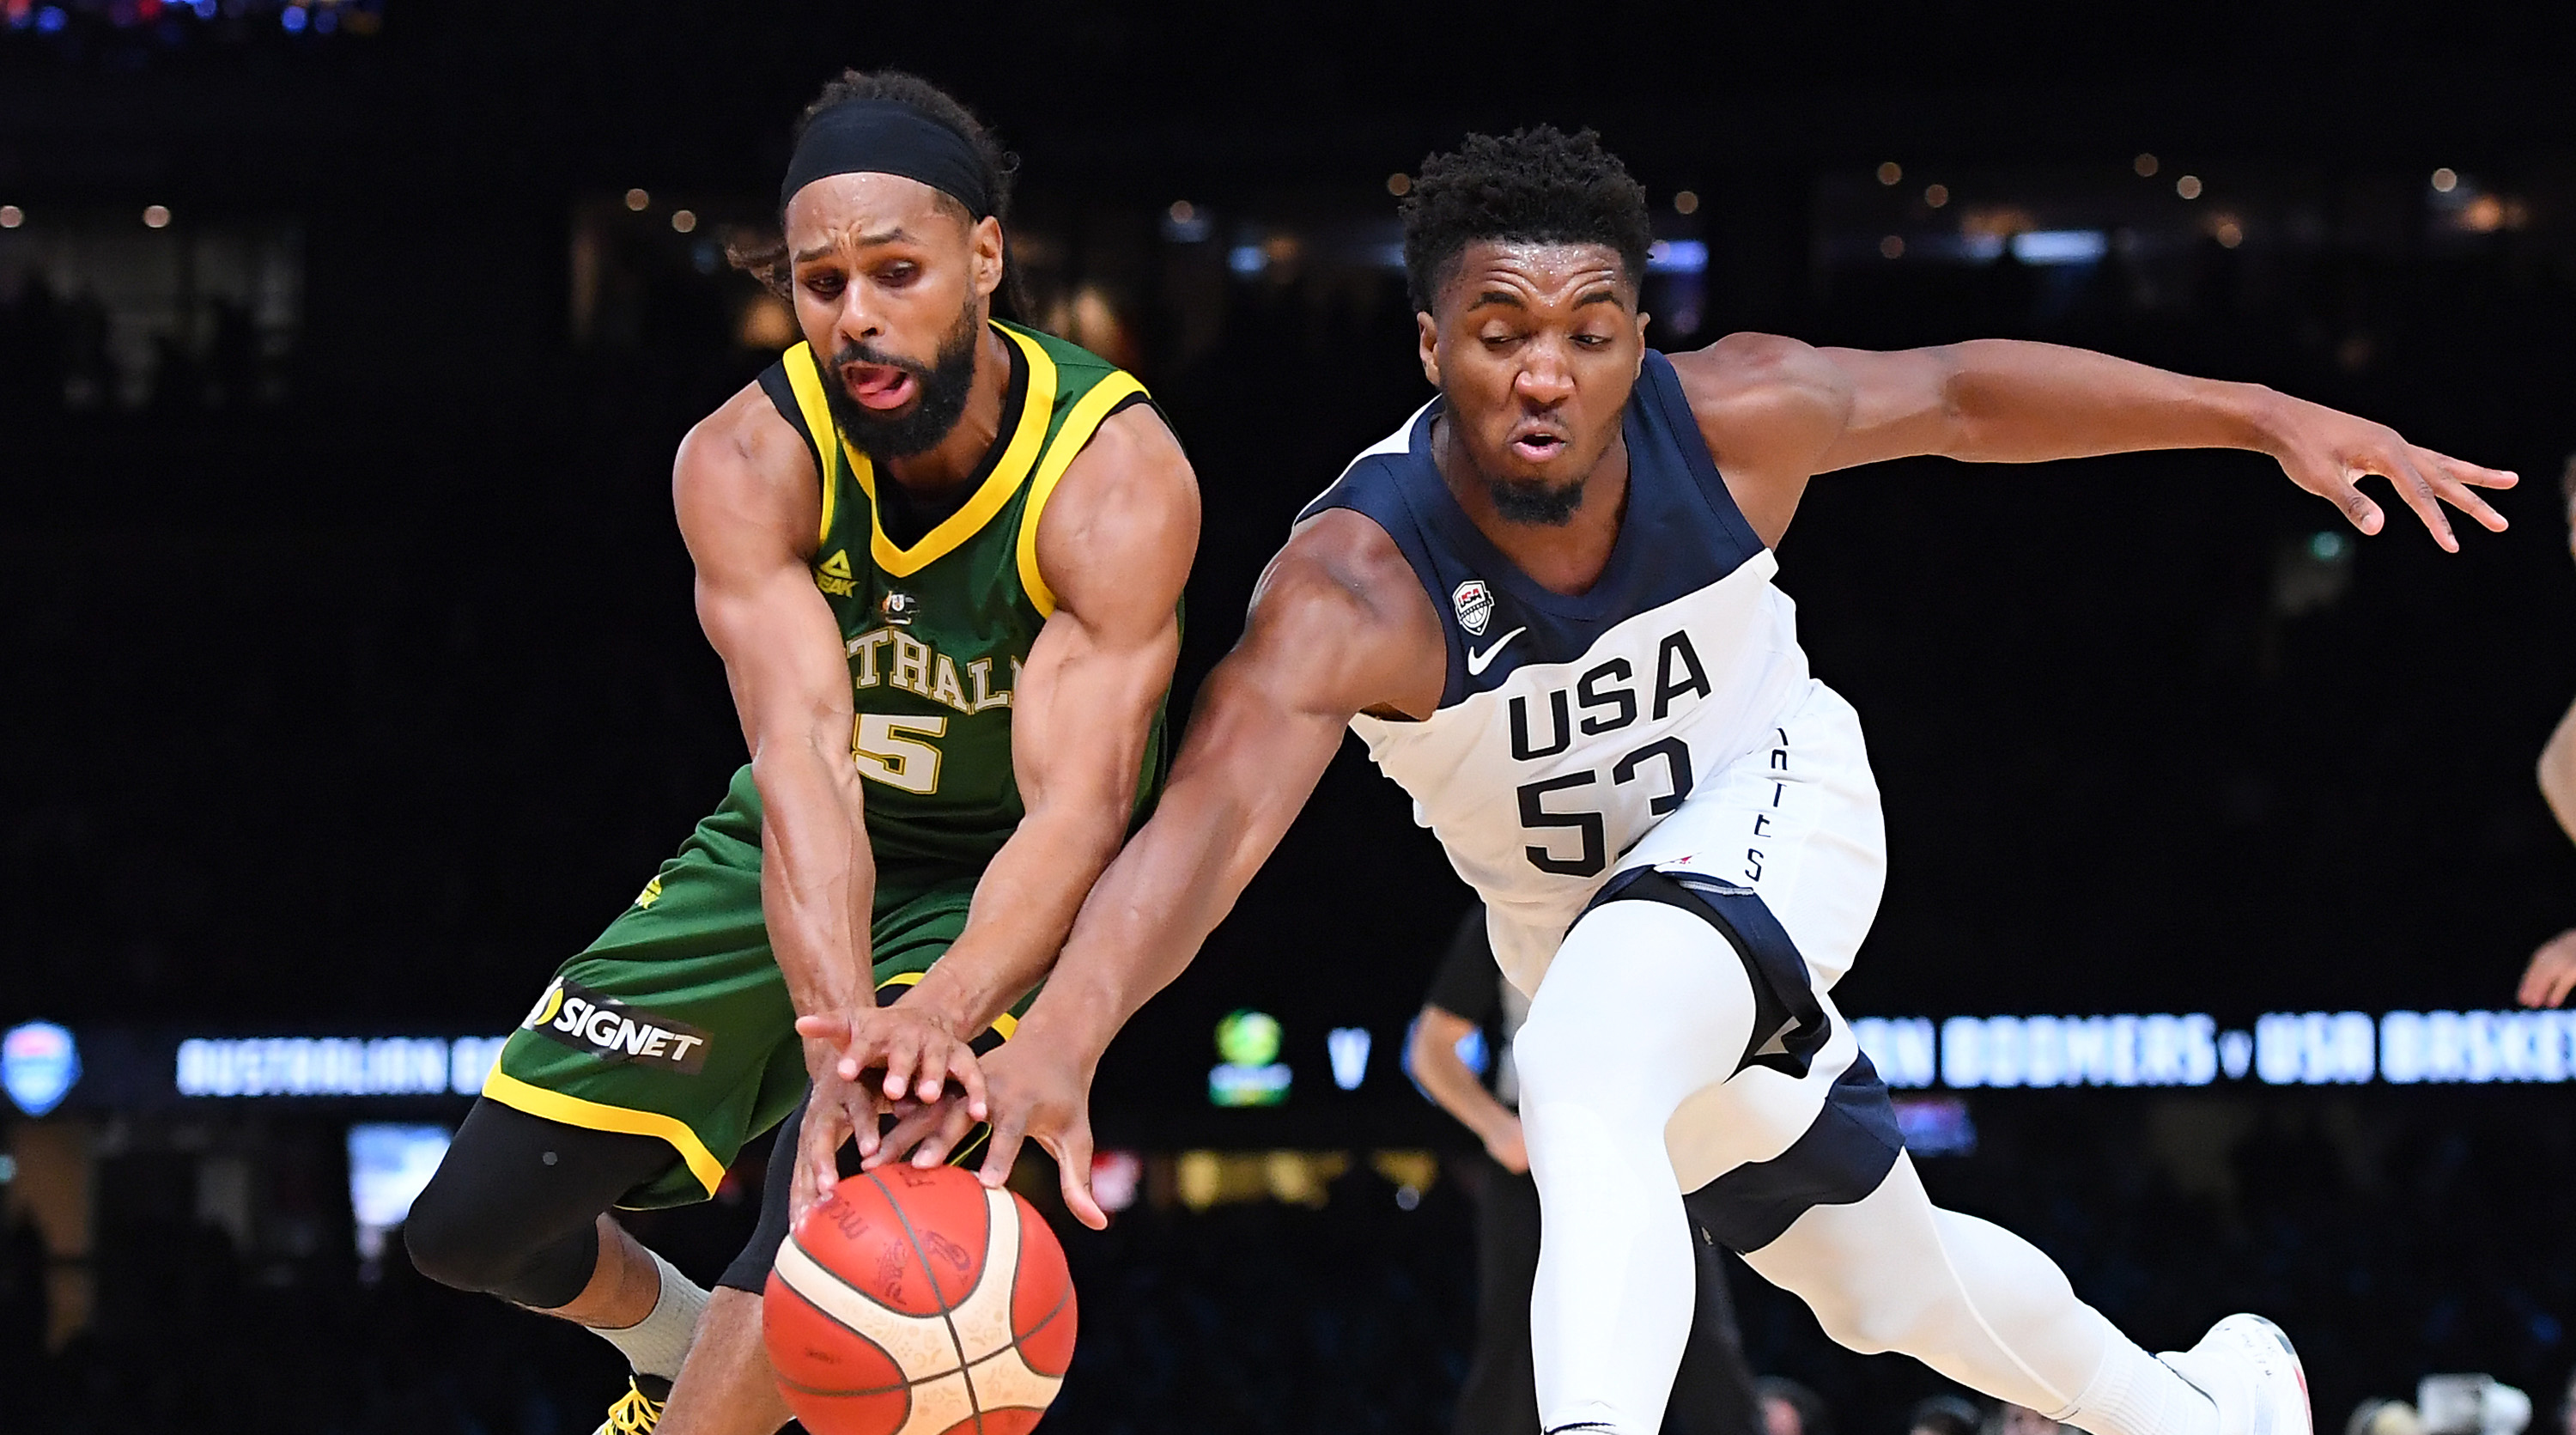 MELBOURNE, AUSTRALIA - AUGUST 22: Patrick Mills of the Boomers and Donovan Mitchell of the USA compete for the ball during the International Basketball Friendly match between the Australian Boomers and Team USA United States of America at Marvel Stadium on August 22, 2019 in Melbourne, Australia. (Photo by Quinn Rooney/Getty Images)